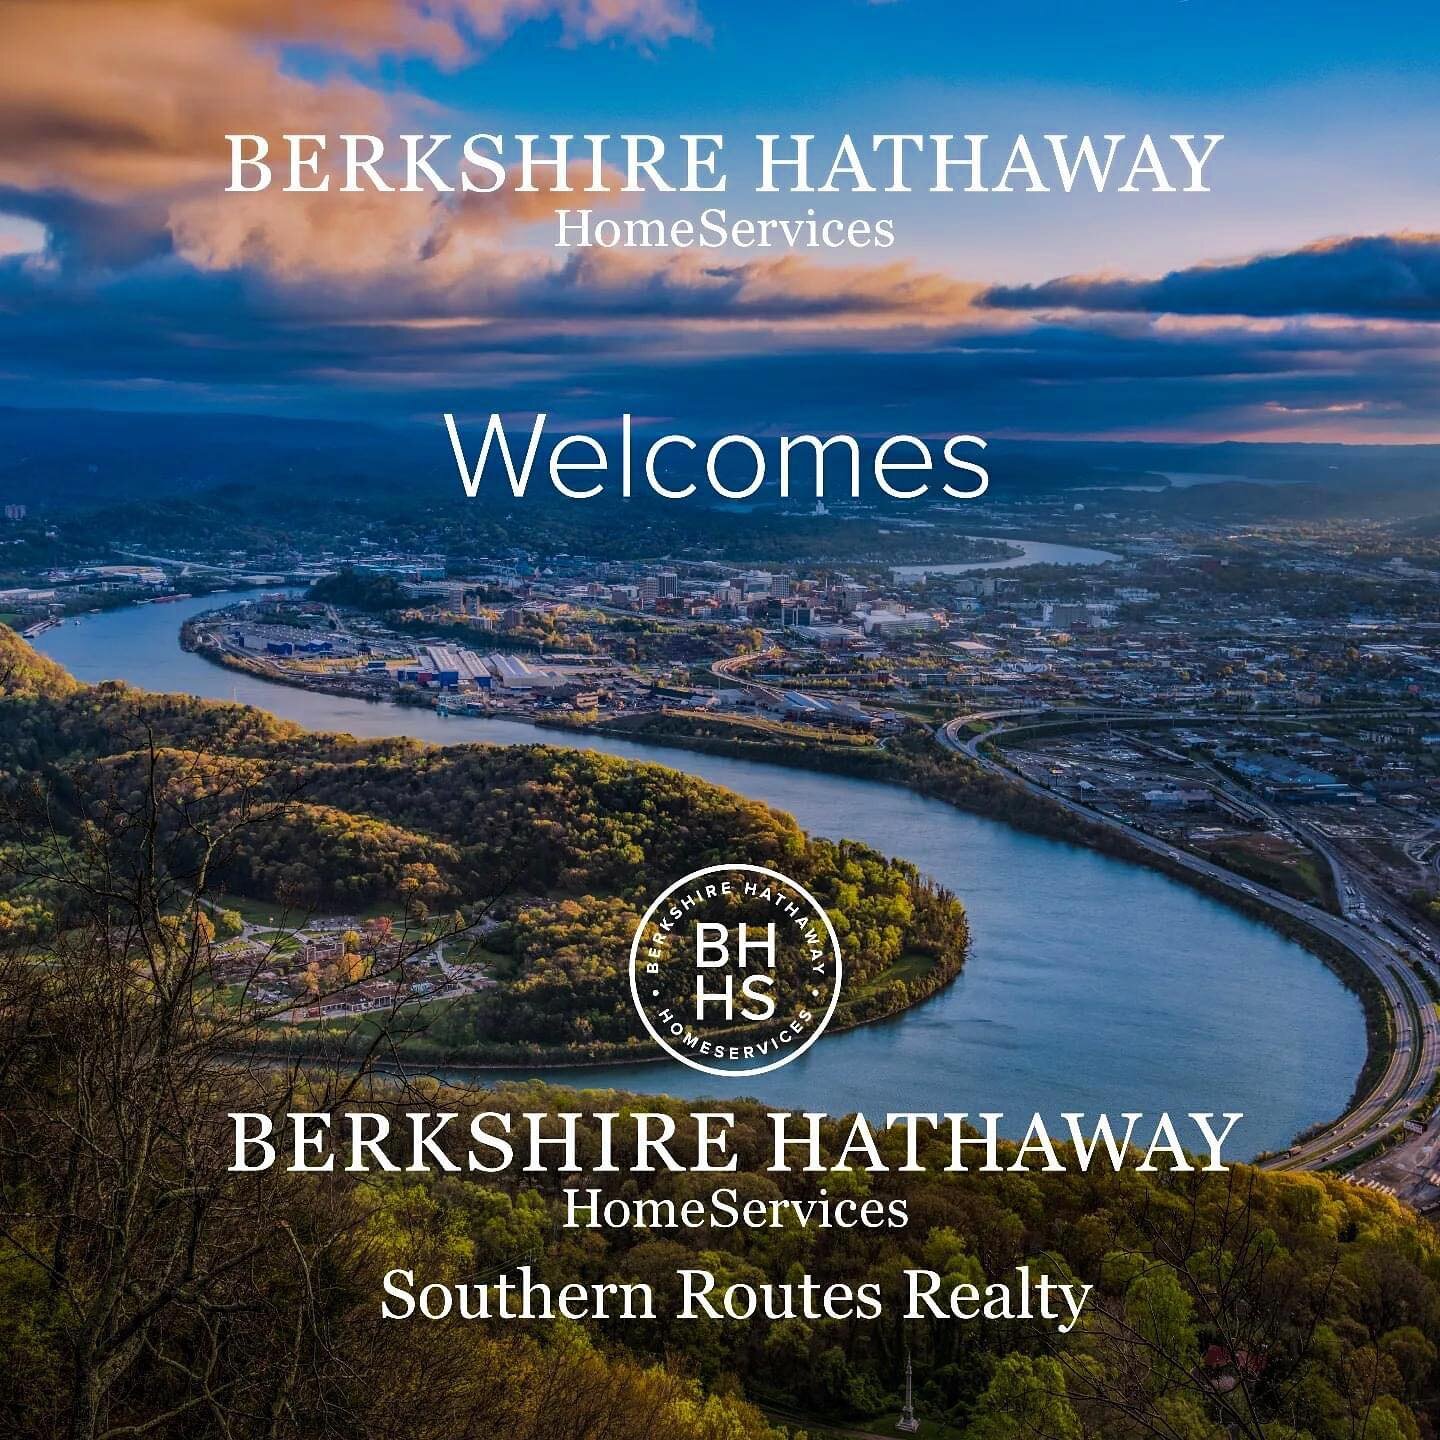 Proud to welcome Berkshire Hathaway HomeServices Southern Routes Realty, which will operate in the states of Tennessee and Georgia, to our #growing #global #network of realtors. This mark&rsquo;s the brand's continued growth in the Southeastern regio